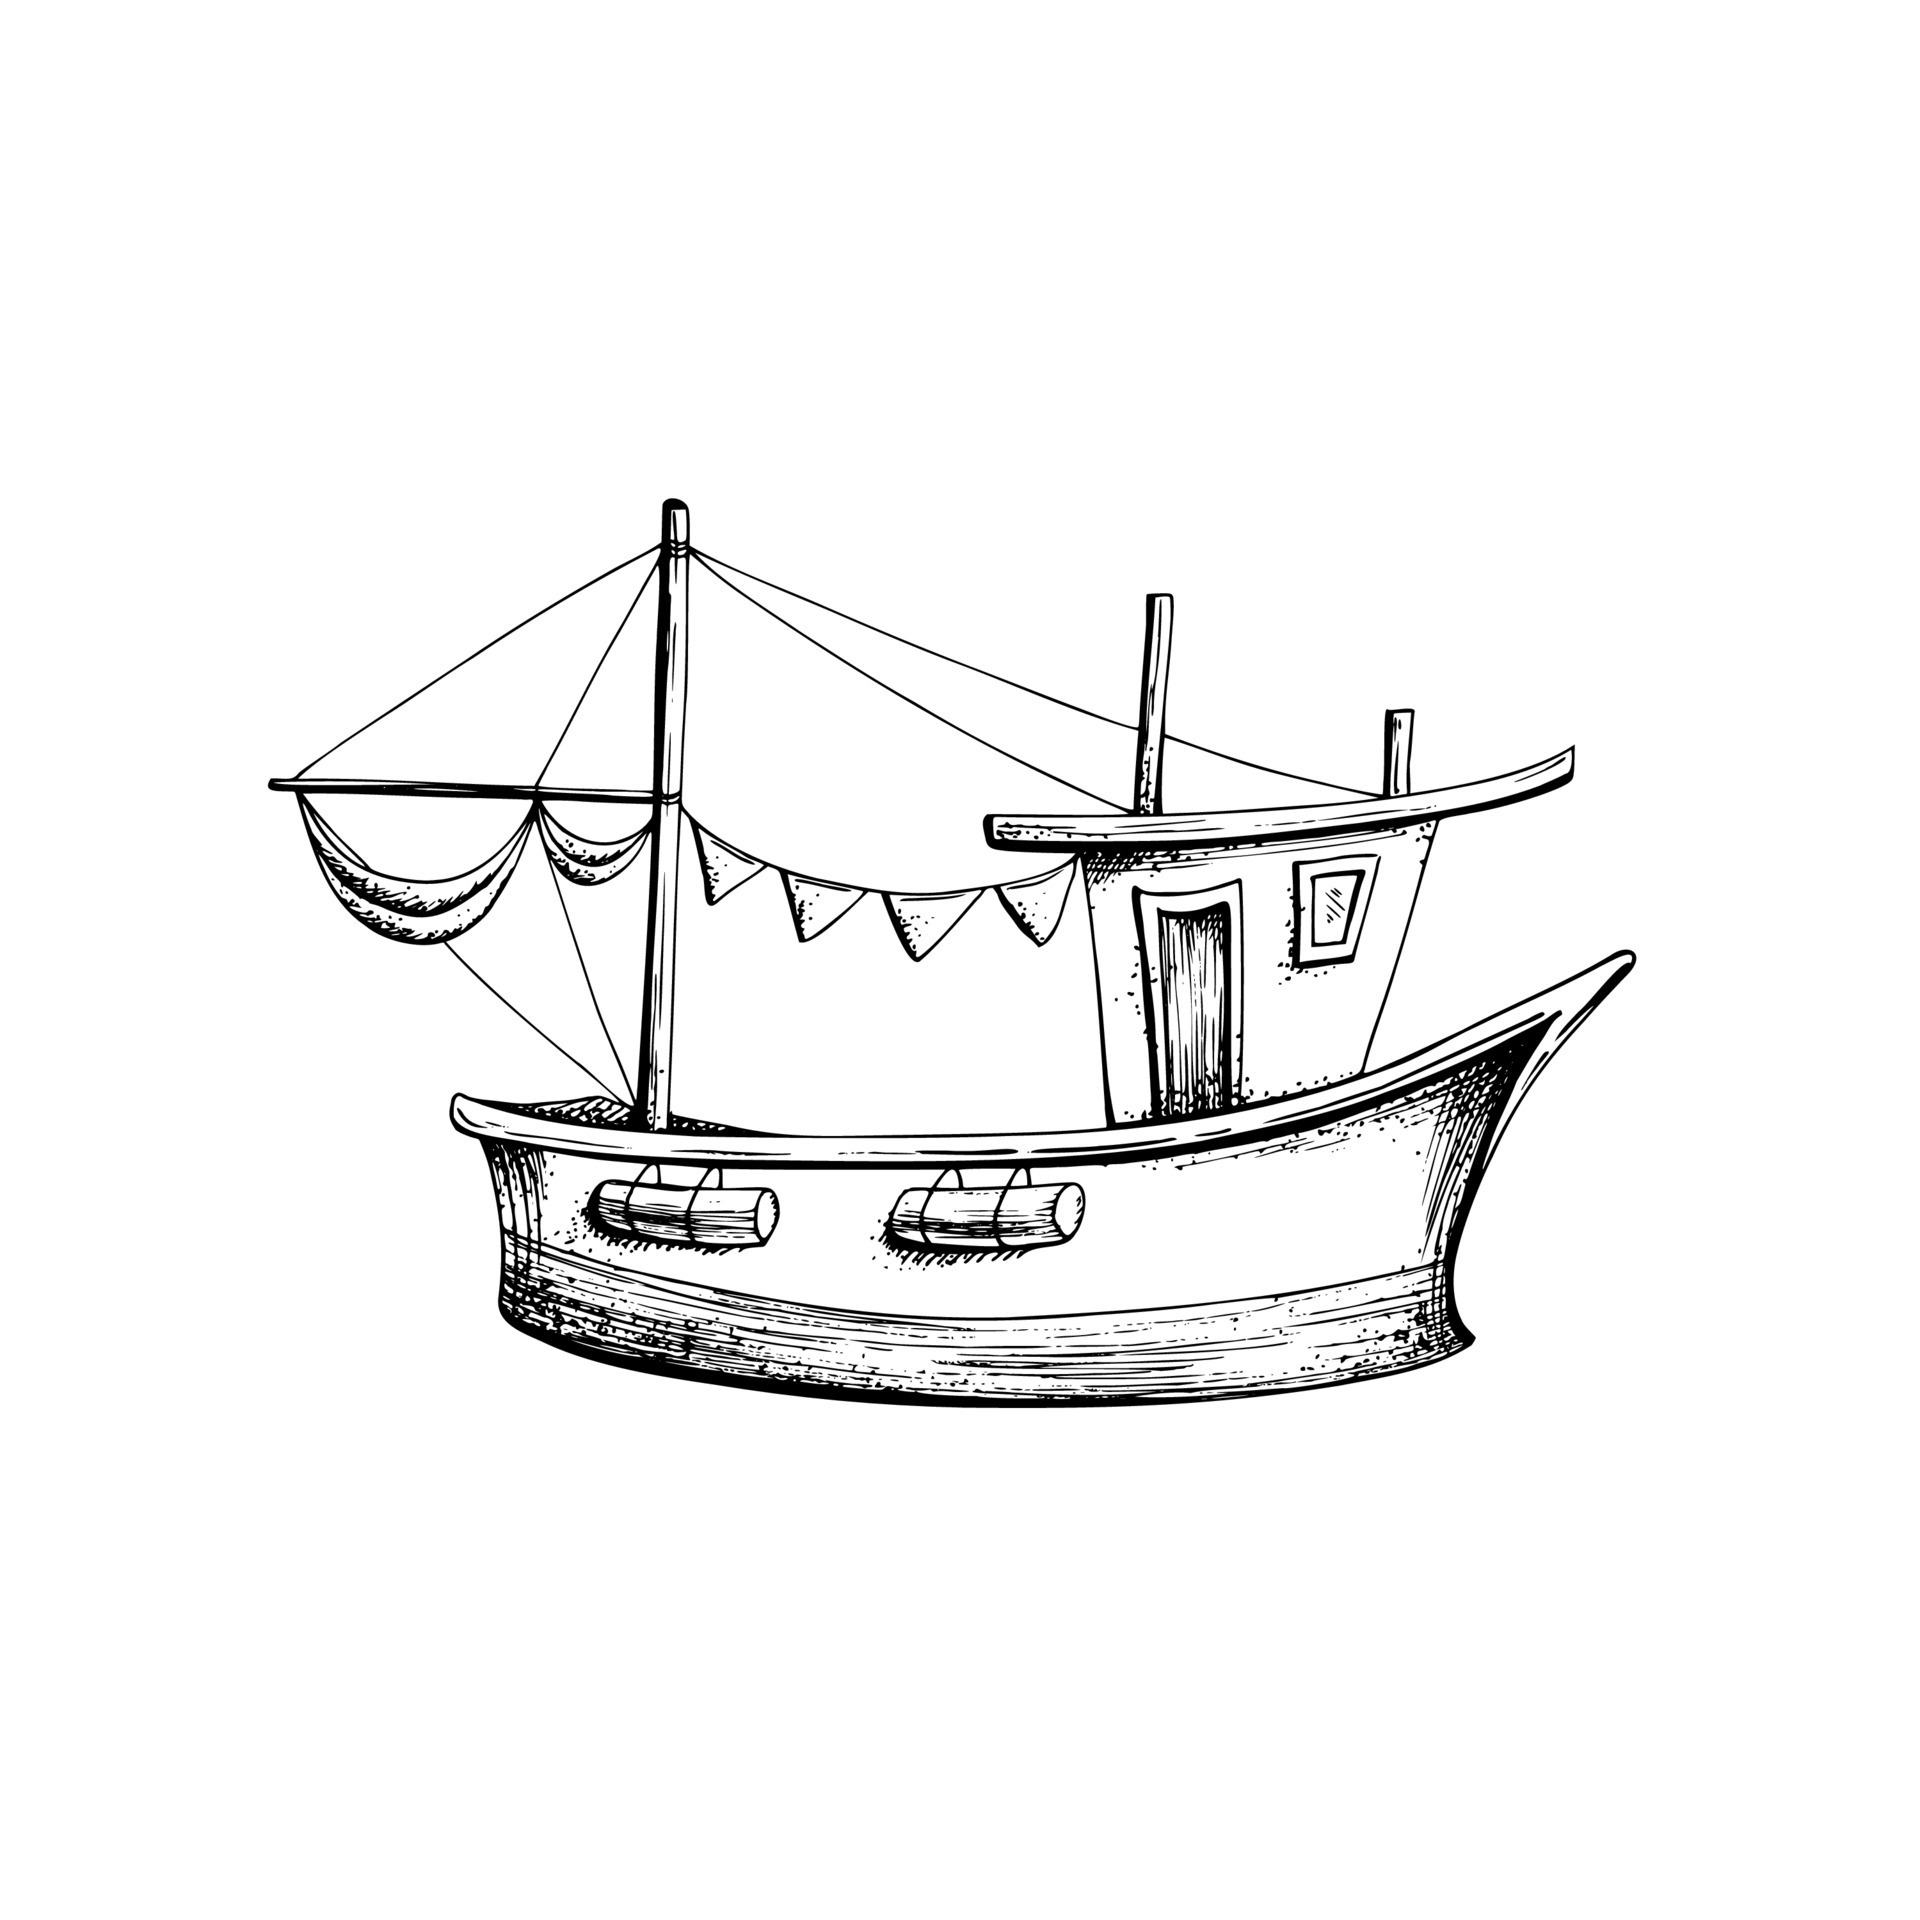 A small boat with a mast and folded sails. Isolated object drawn